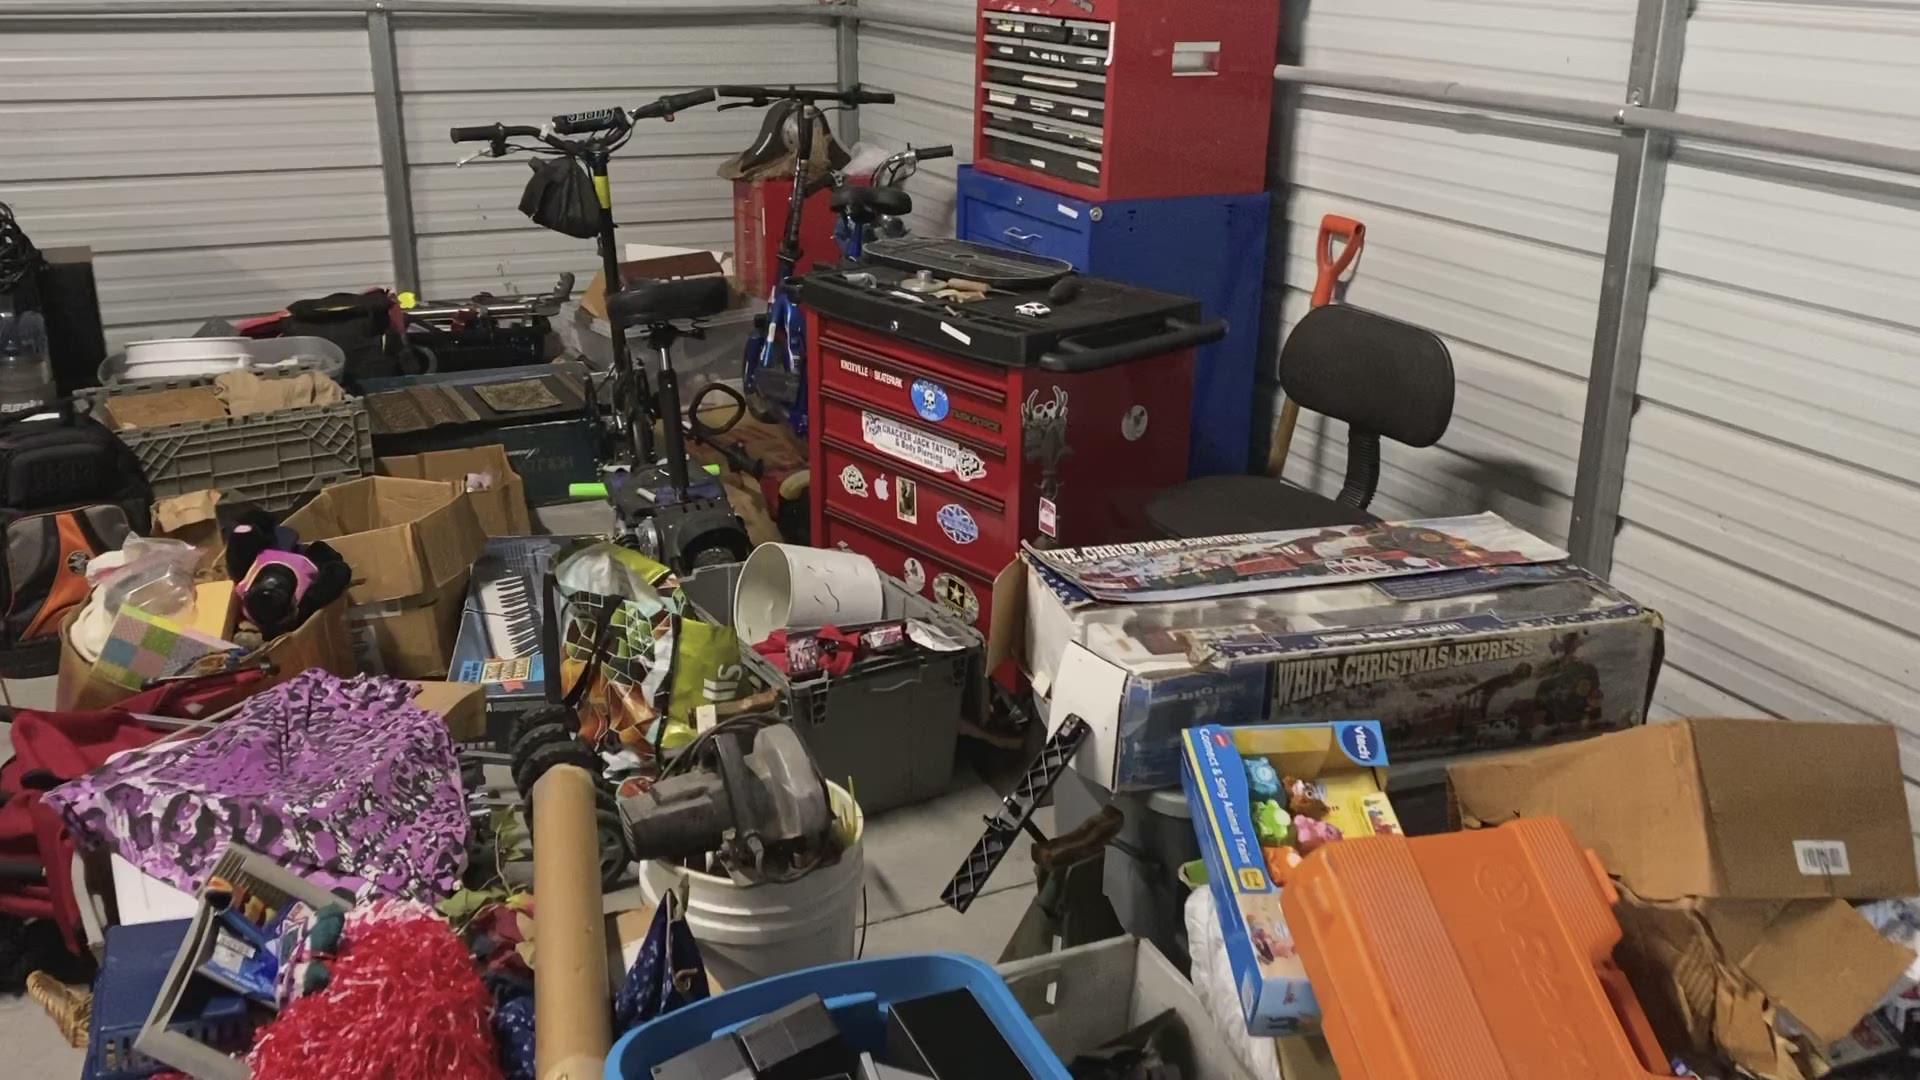 KCSO and KPD have recovered items from storage building burglaries. Officials said the thefts took place from November 2018 and October 2019.